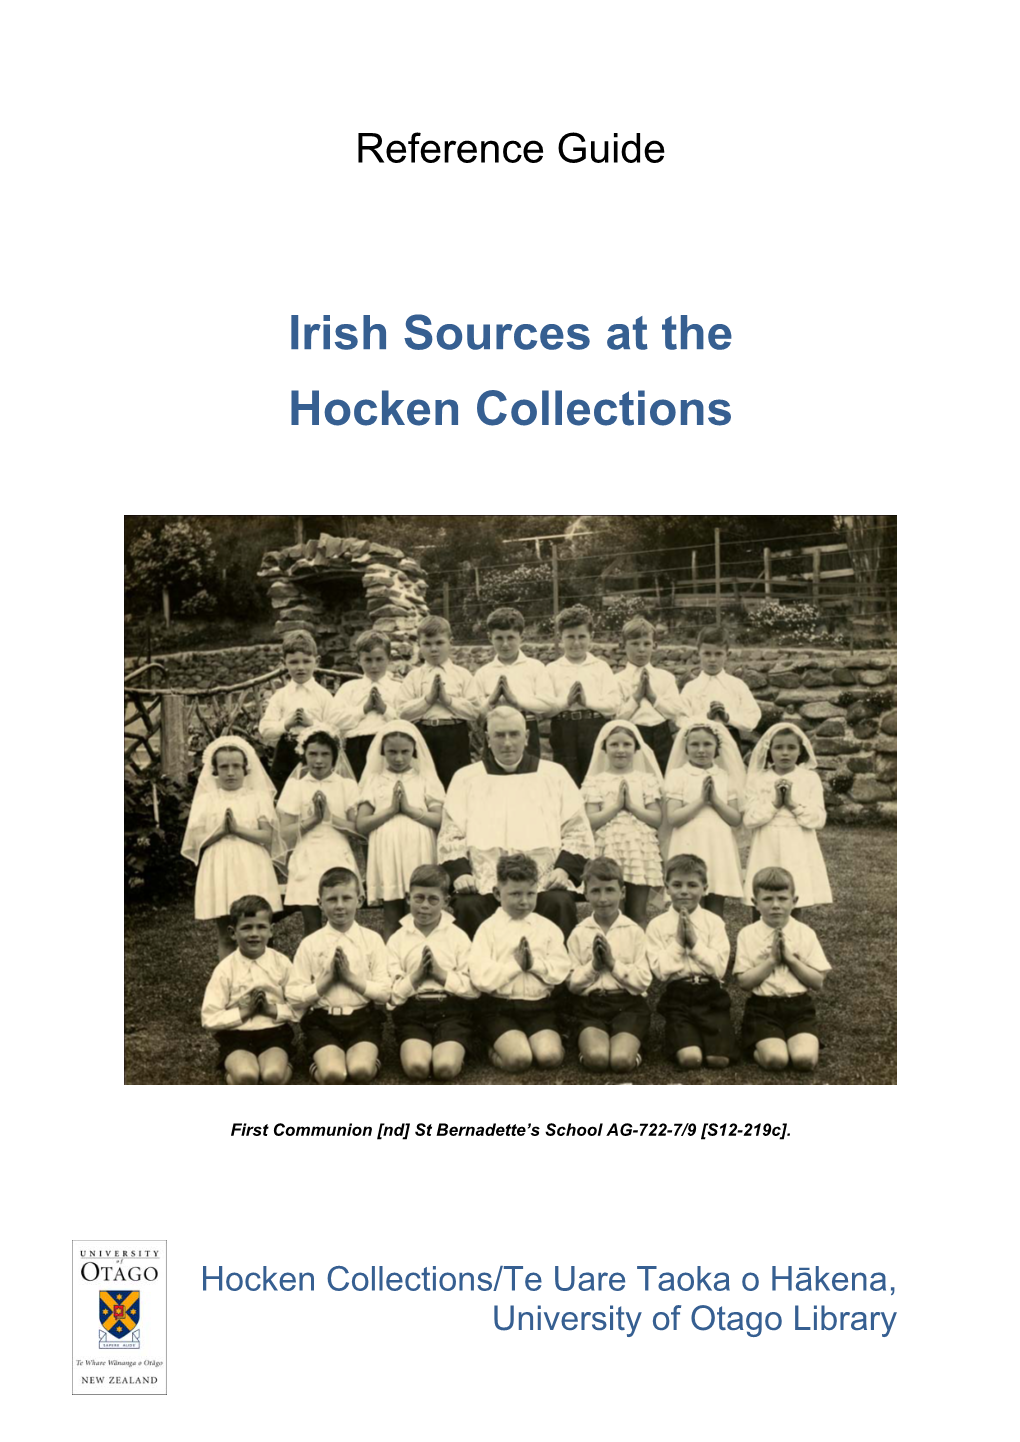 Irish Sources at the Hocken Collections